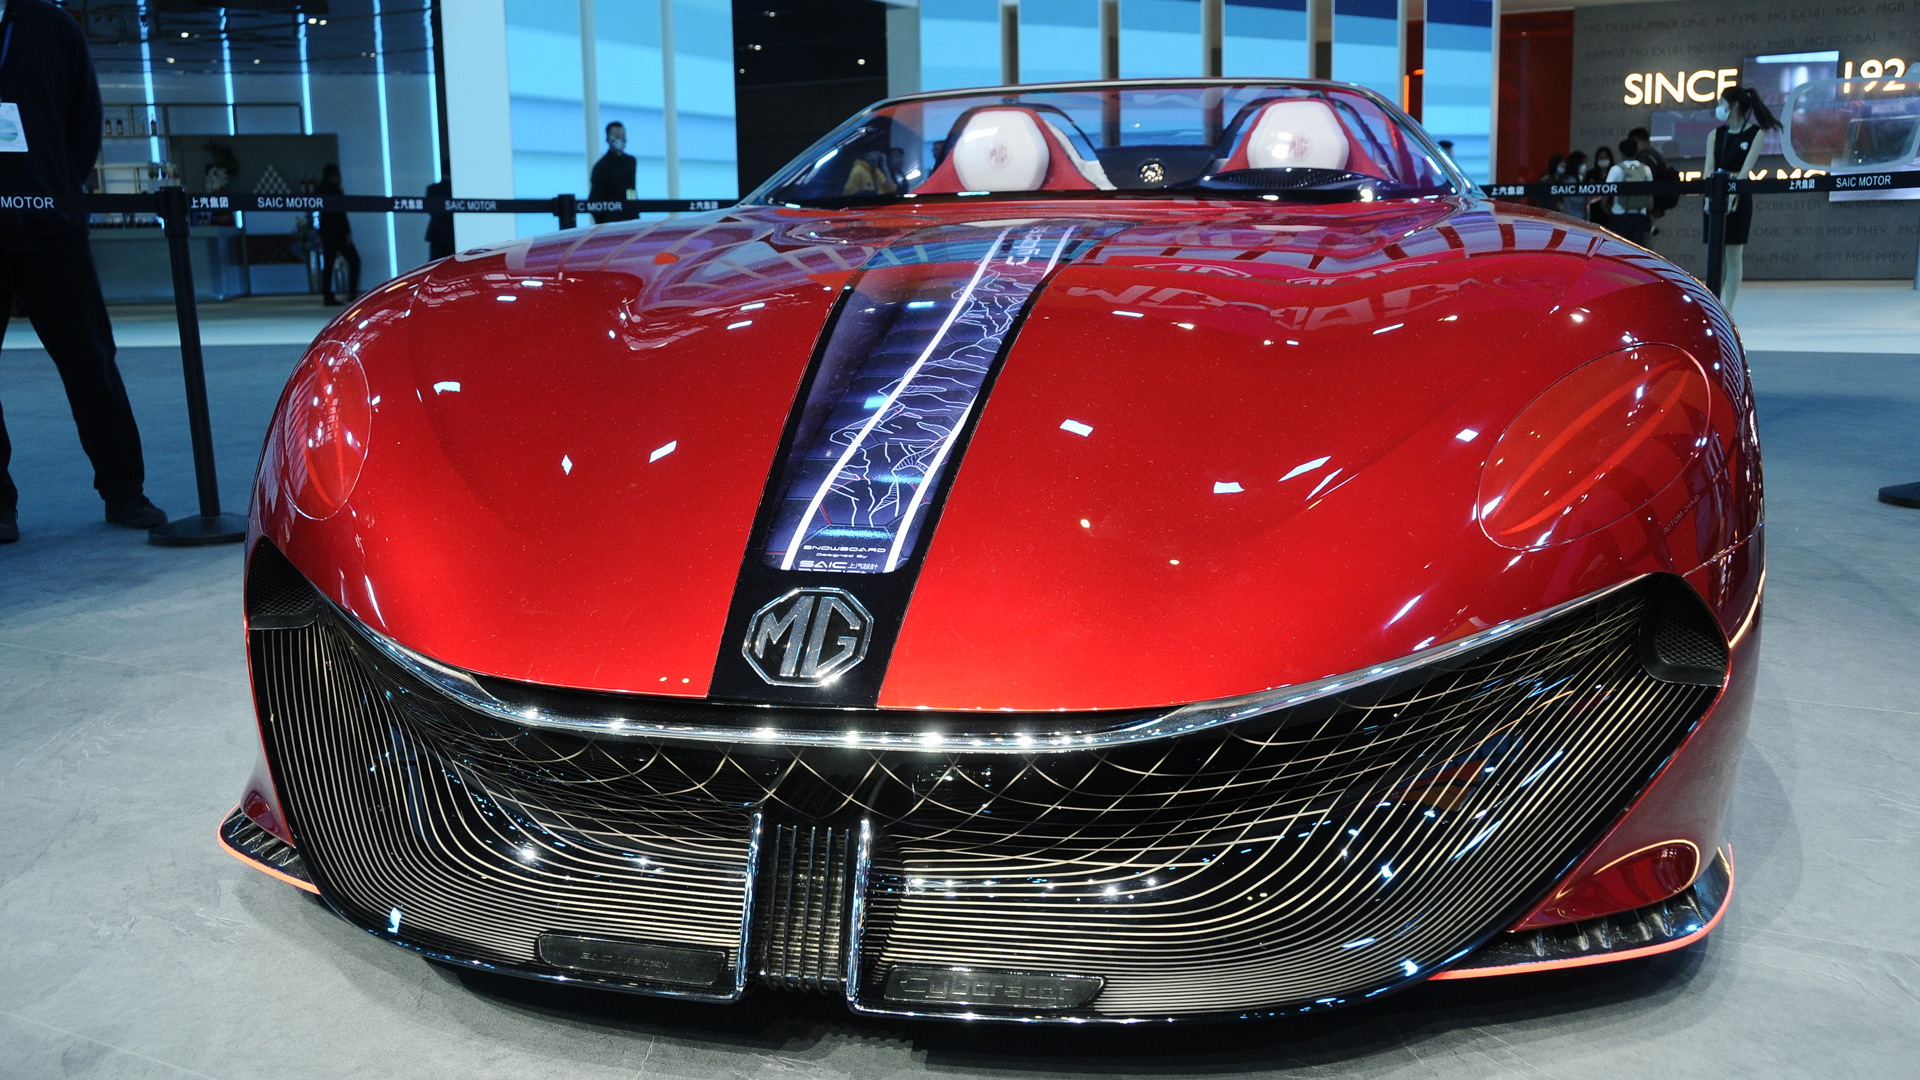 MG Cyberster concept - 2021 Shanghai auto show